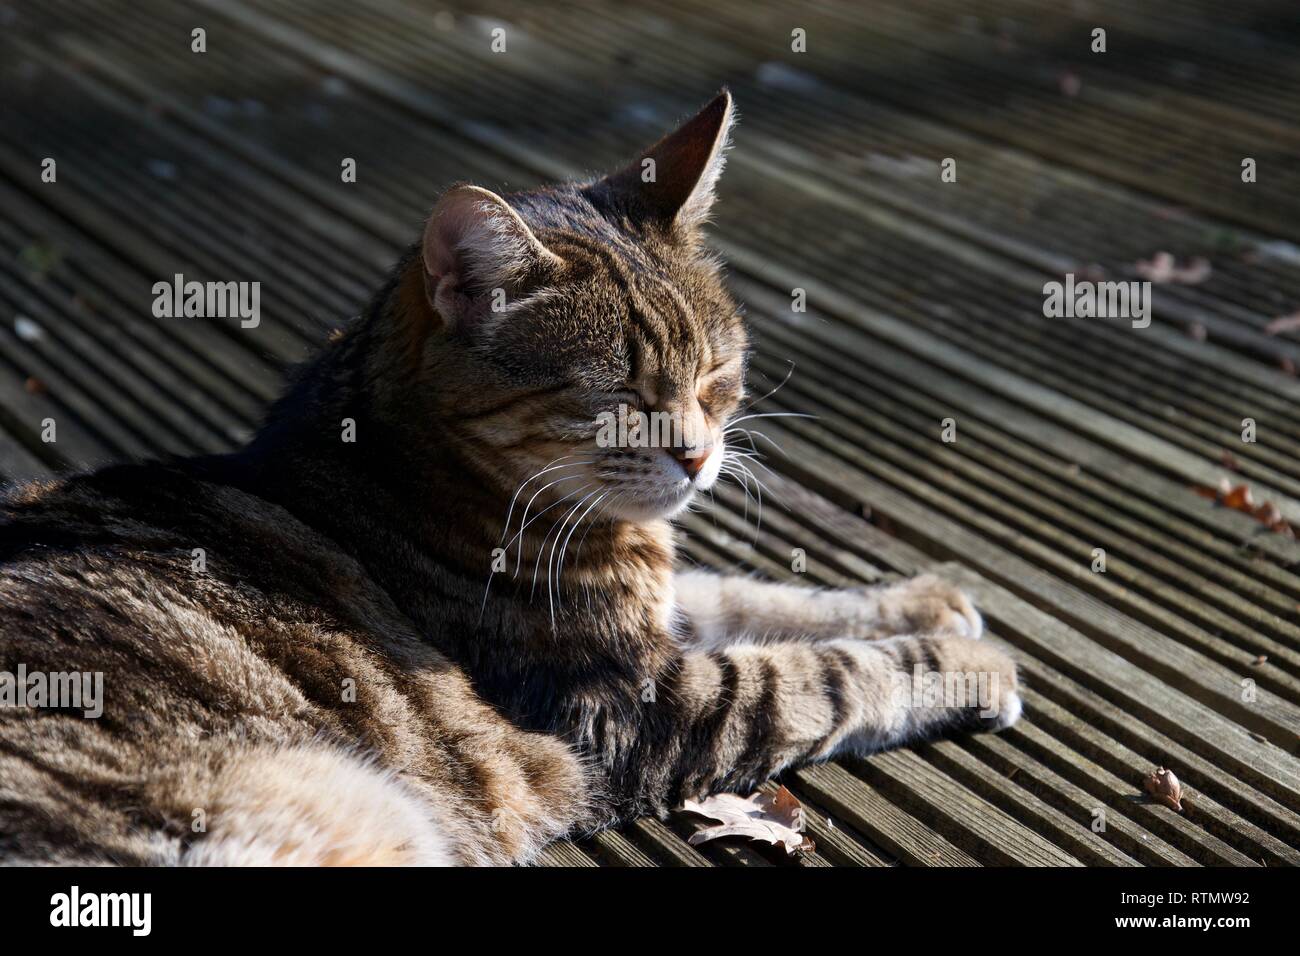 A brown, ginger, striped pet cat lies on decking outdoors in a garden, her eyes closed and partially sunbathing in bright sunlight Stock Photo